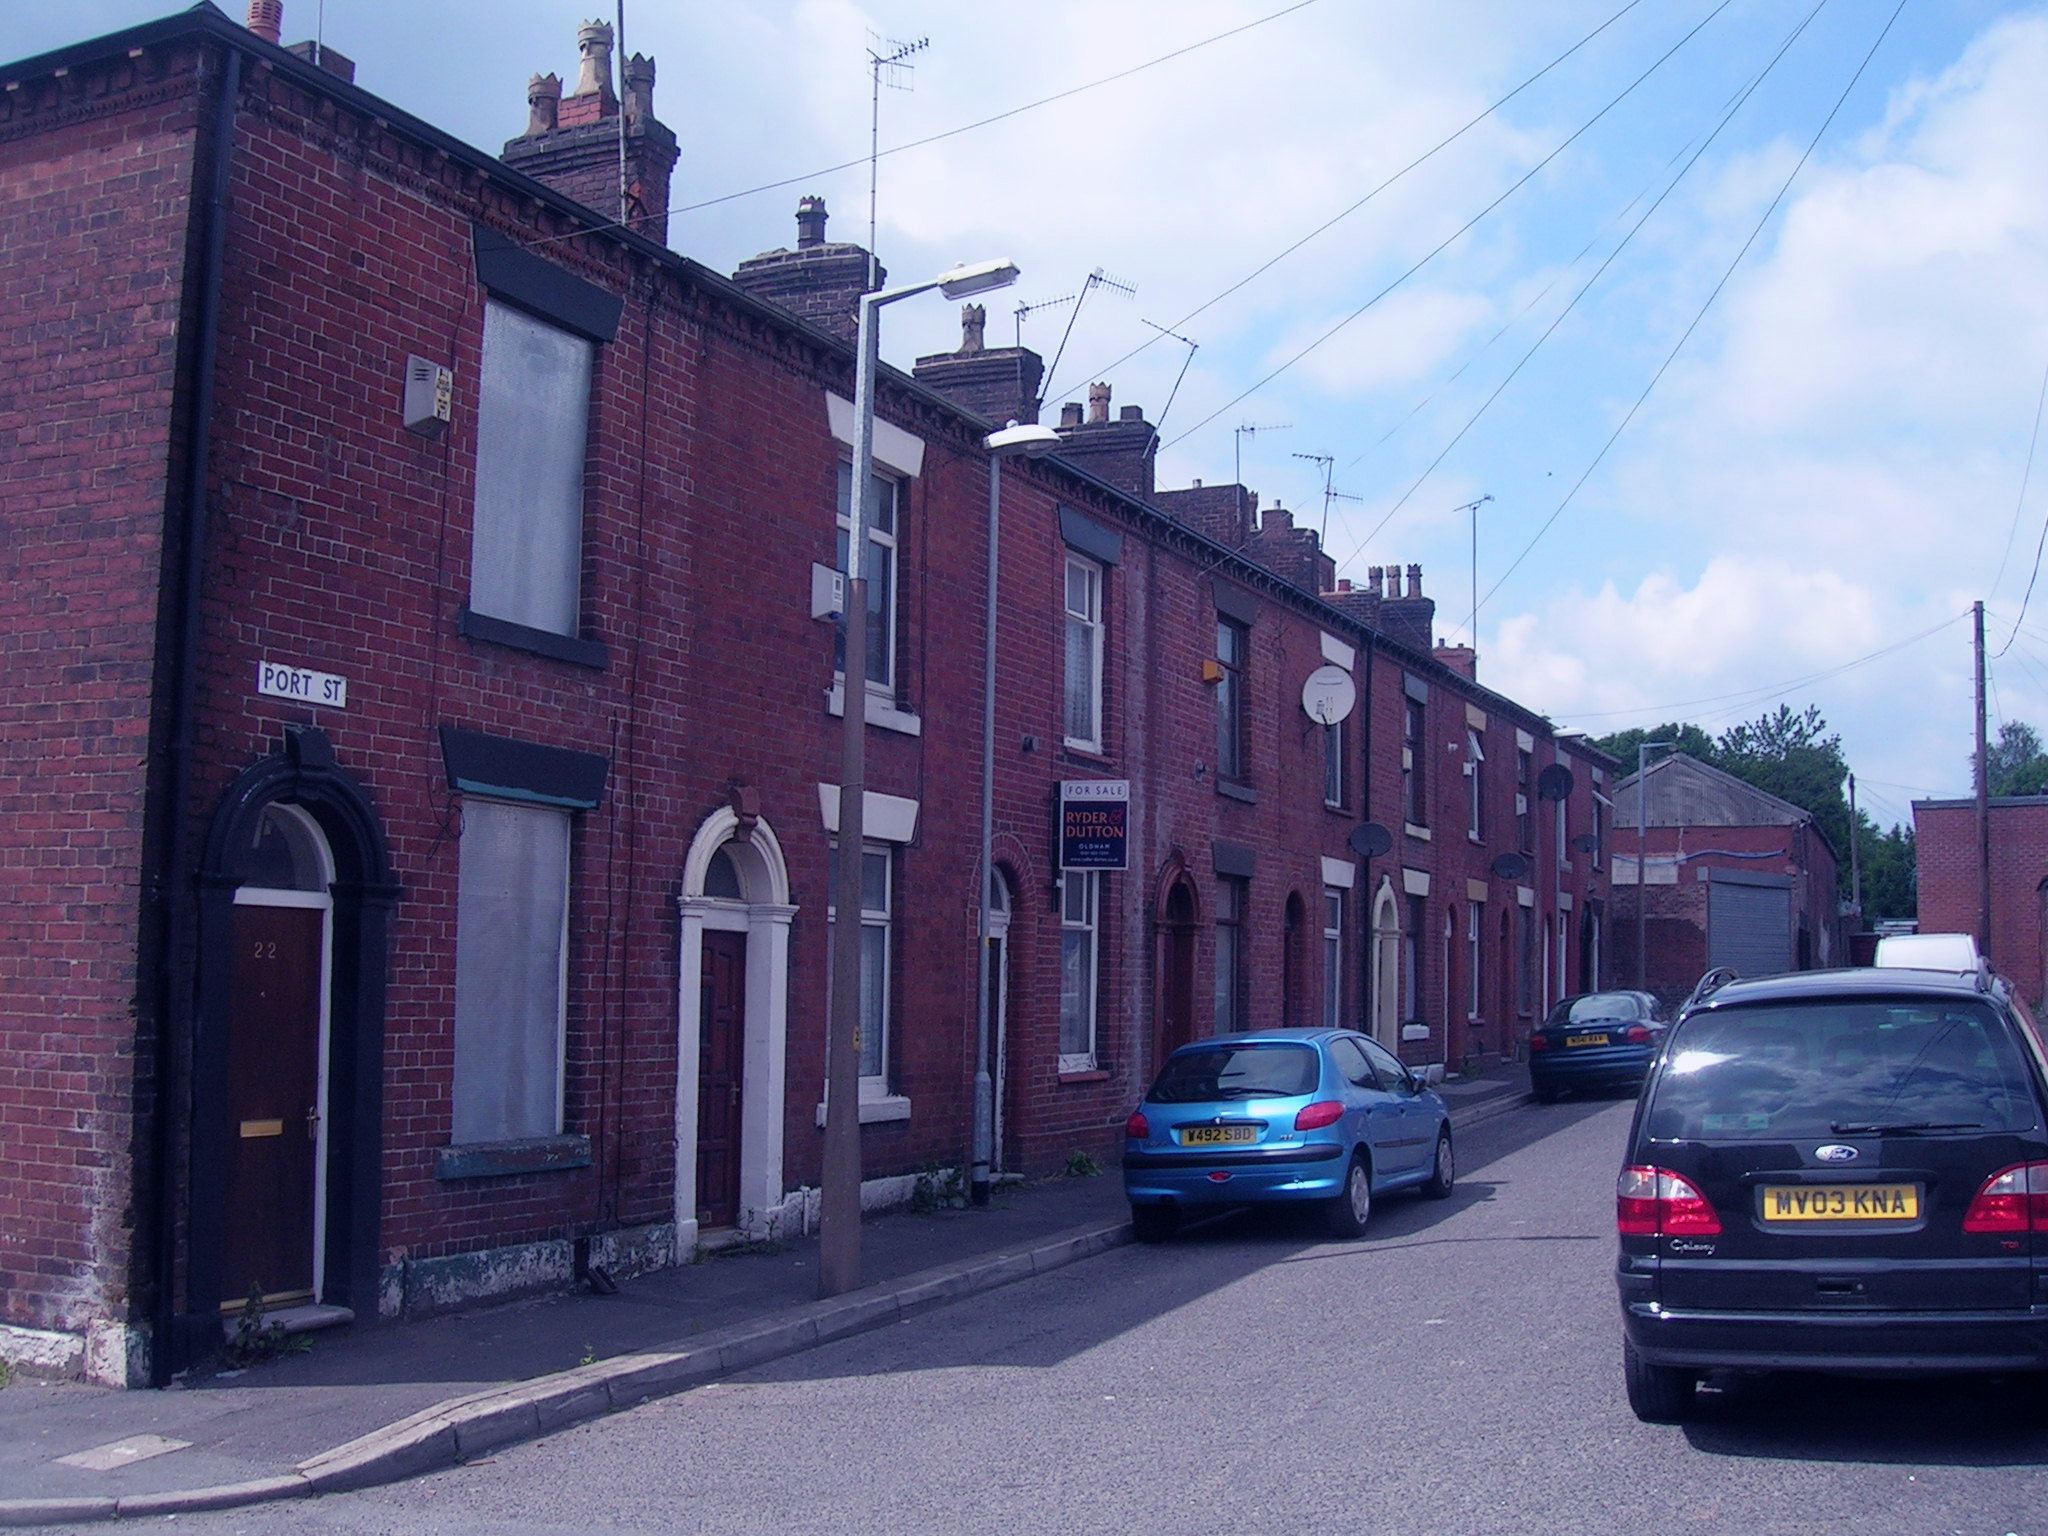 several cars parked along a brick street next to brick buildings